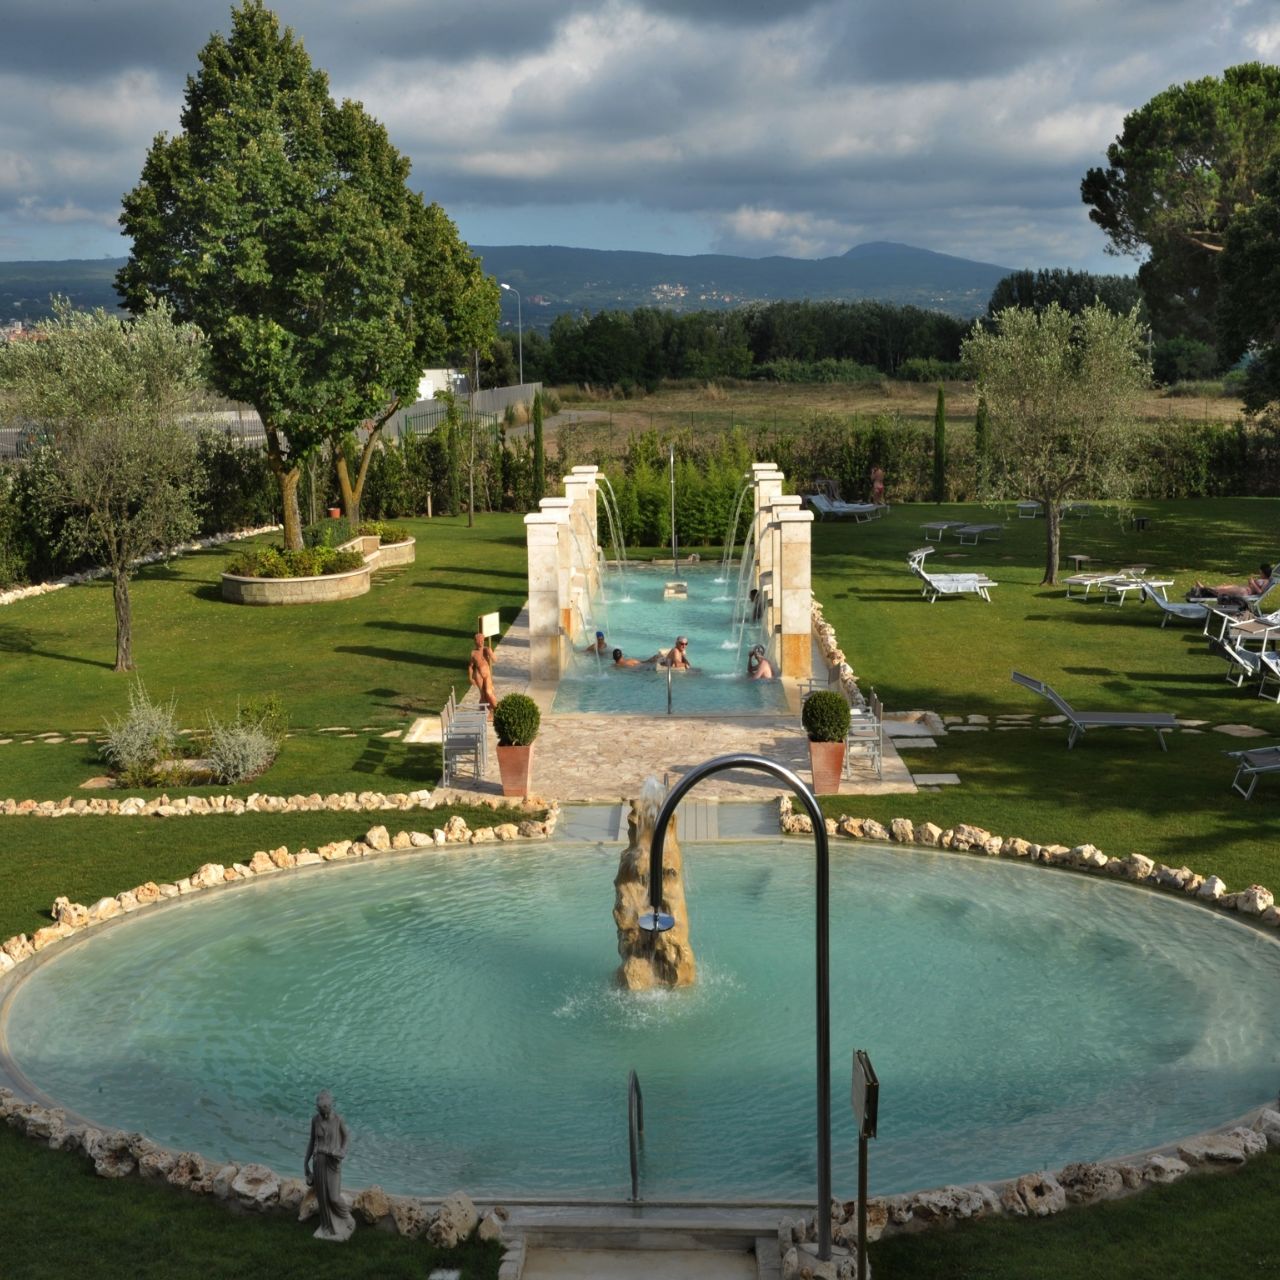 Hotel Salus Terme - Viterbo - Great prices at HOTEL INFO